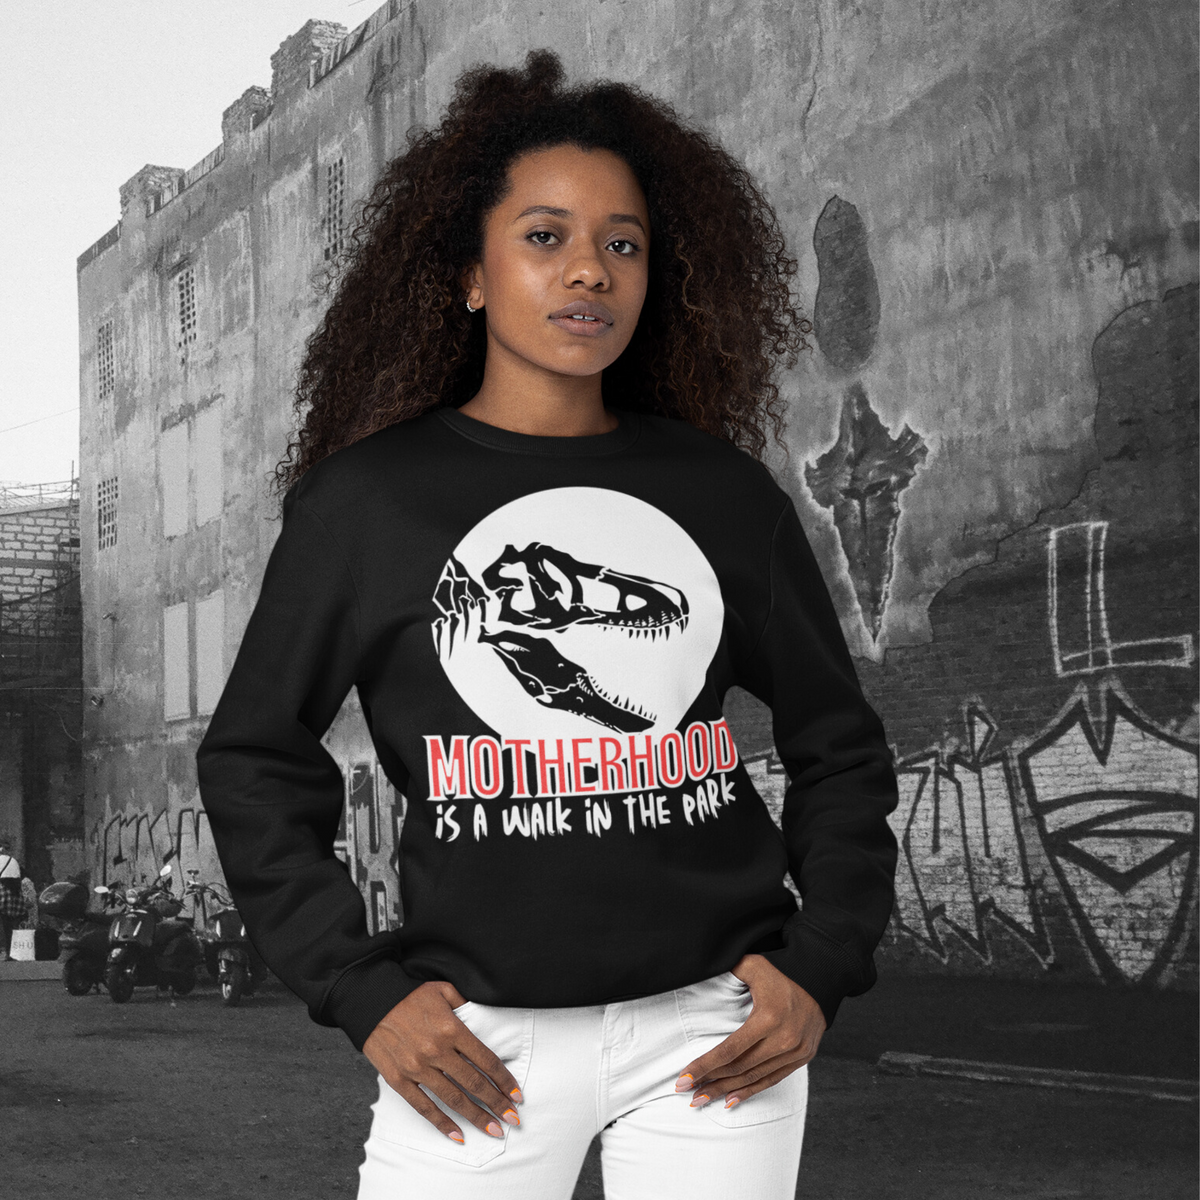 sweatshirt, dinosaur, motherhood, parenting, family, mom life, cozy wear, humorous design, mother's day, mom gift, soft fabric, light-hearted phrase, casual style, warmth, versatile, comfort, strength, adventure, mom pride, laughter, fashion, quality, durability, motherhood its a walk in the park tee